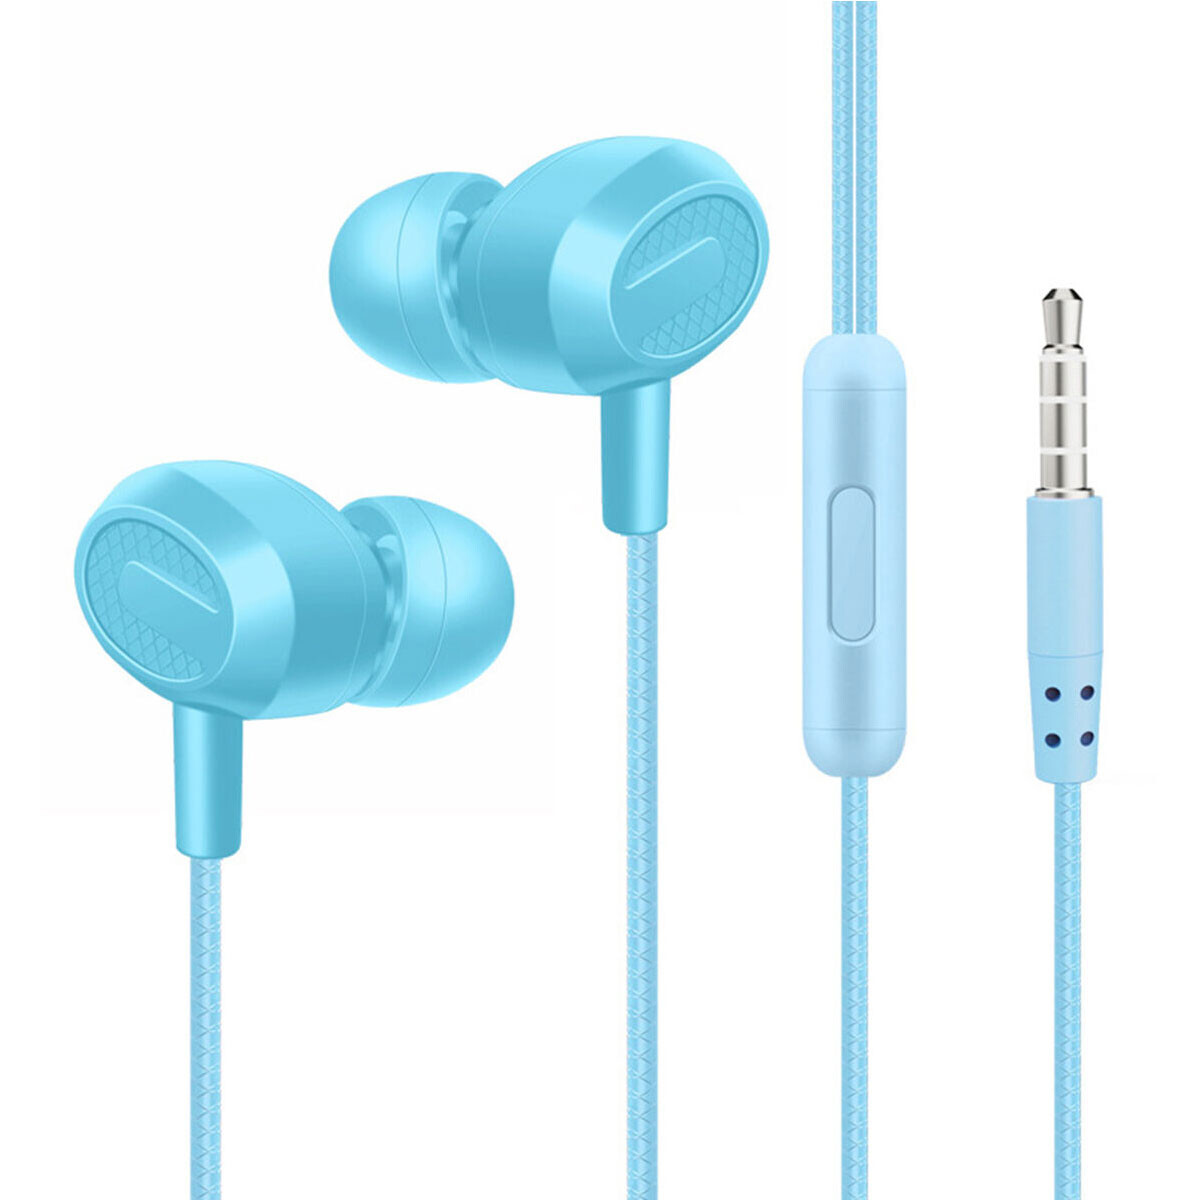 AURICULARES CON CABLE IN EAR L-204 EXTRA BASS AZUL 